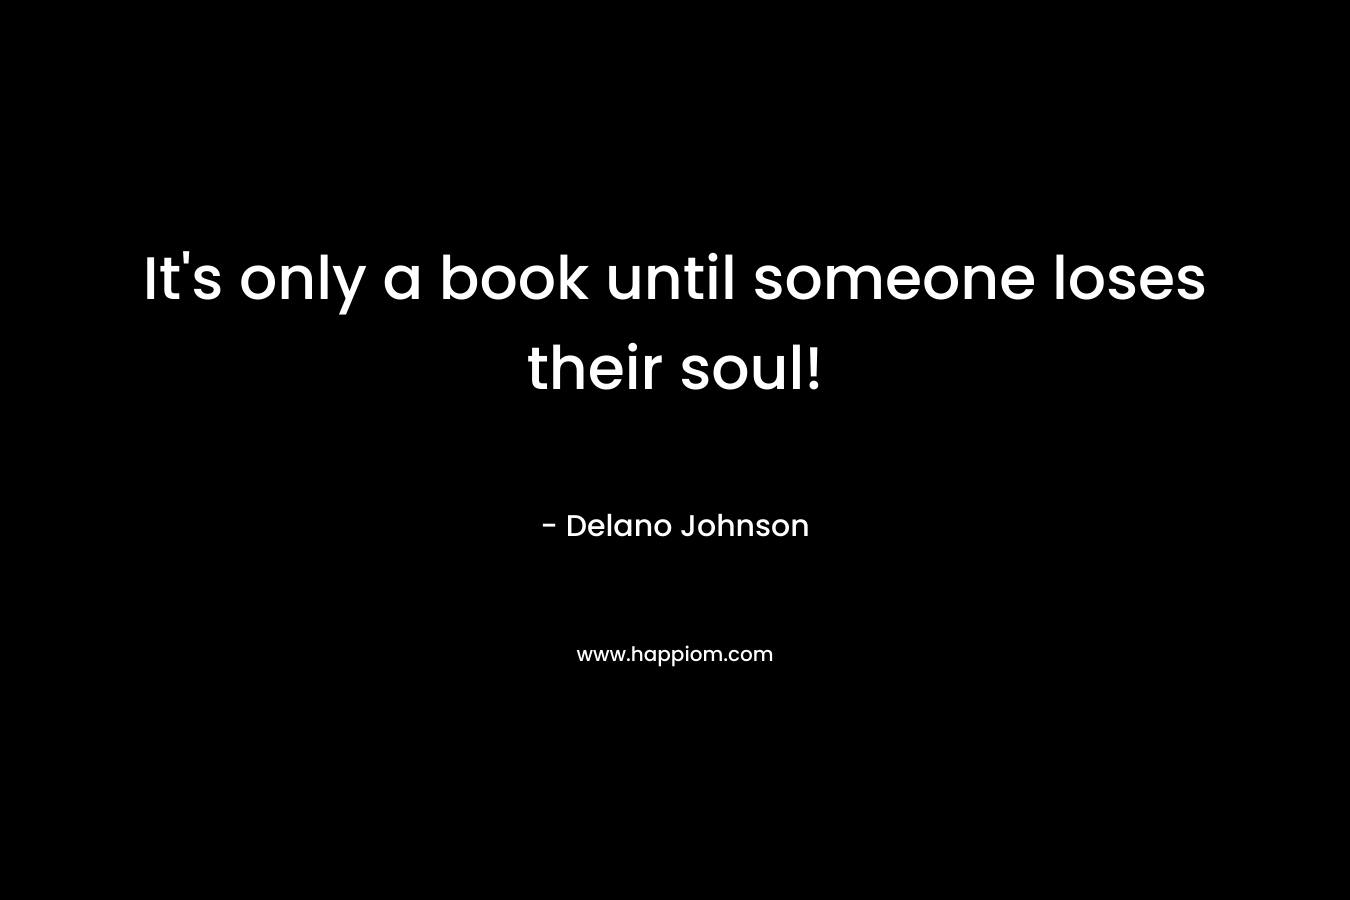 It's only a book until someone loses their soul!